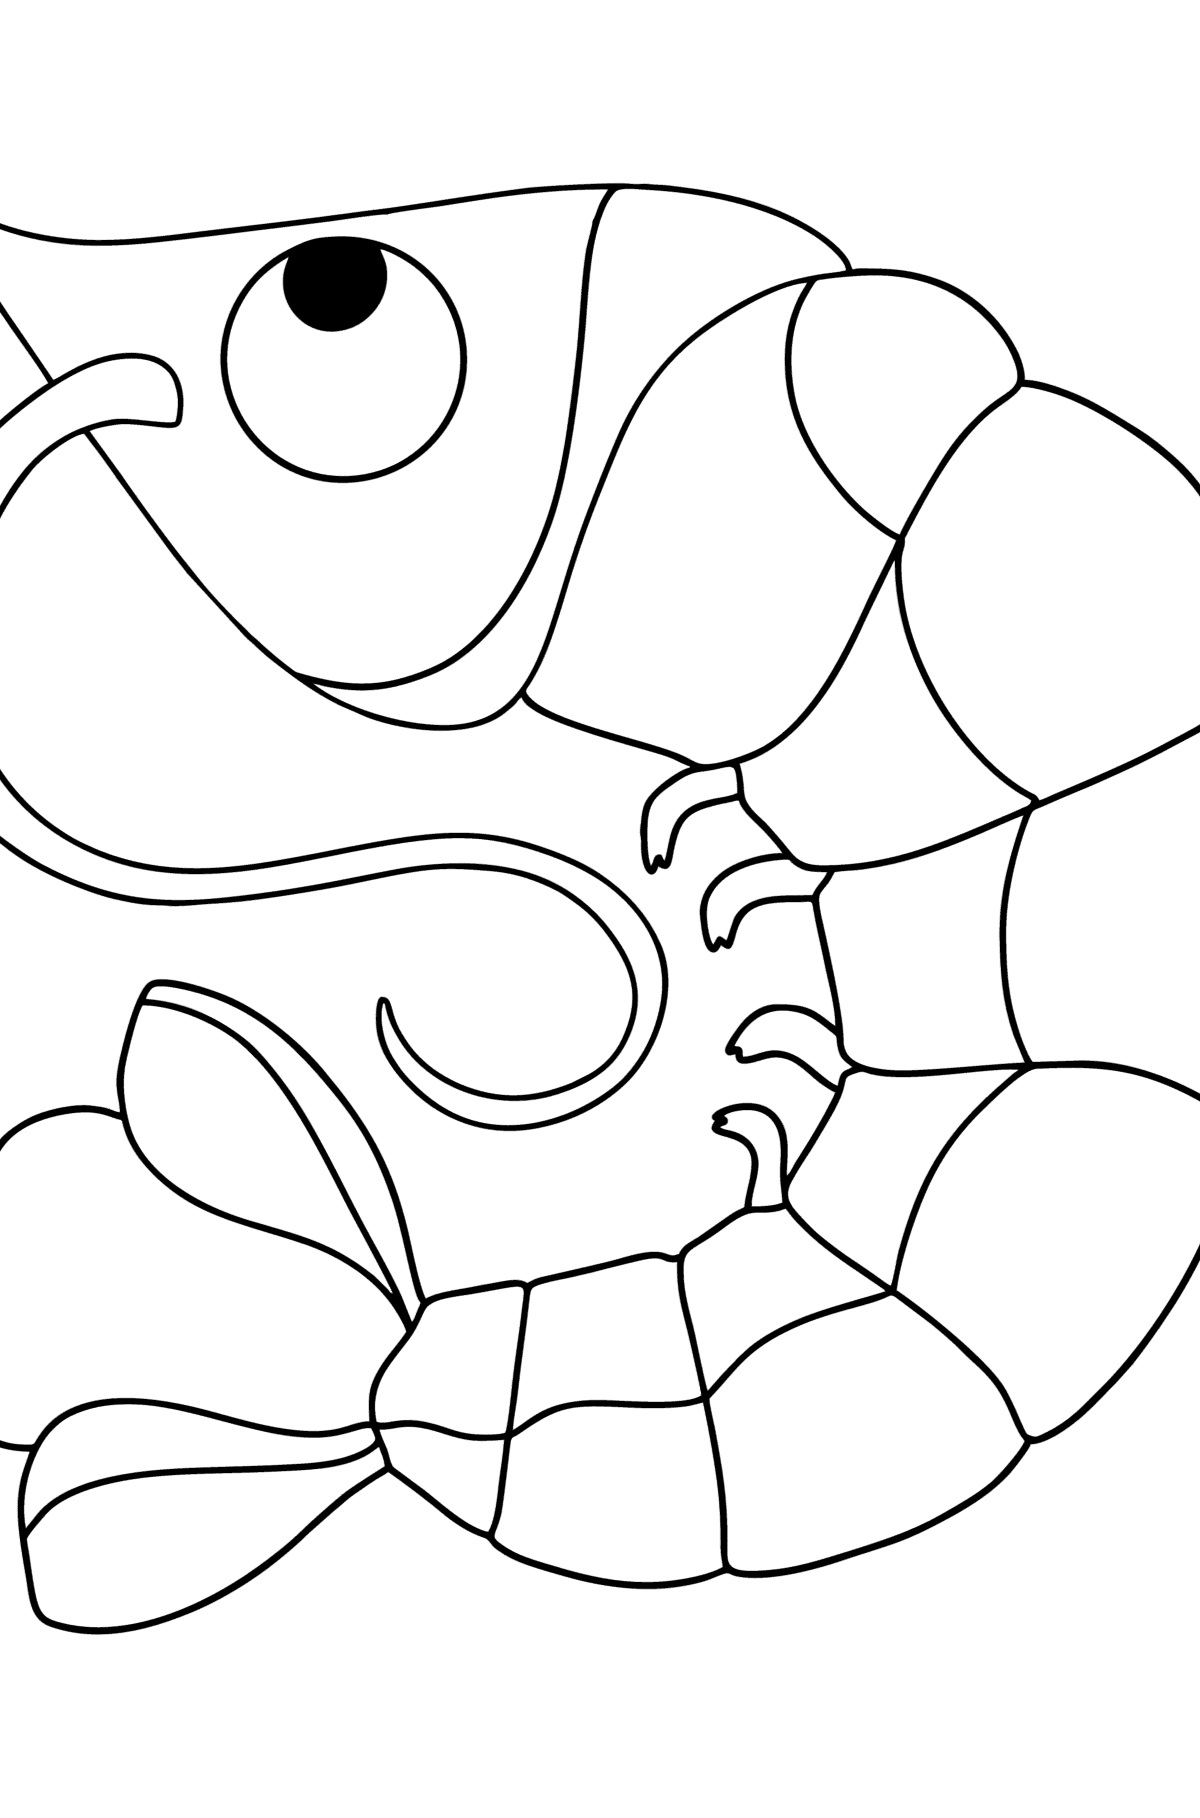 Shrimp coloring page - Coloring Pages for Kids